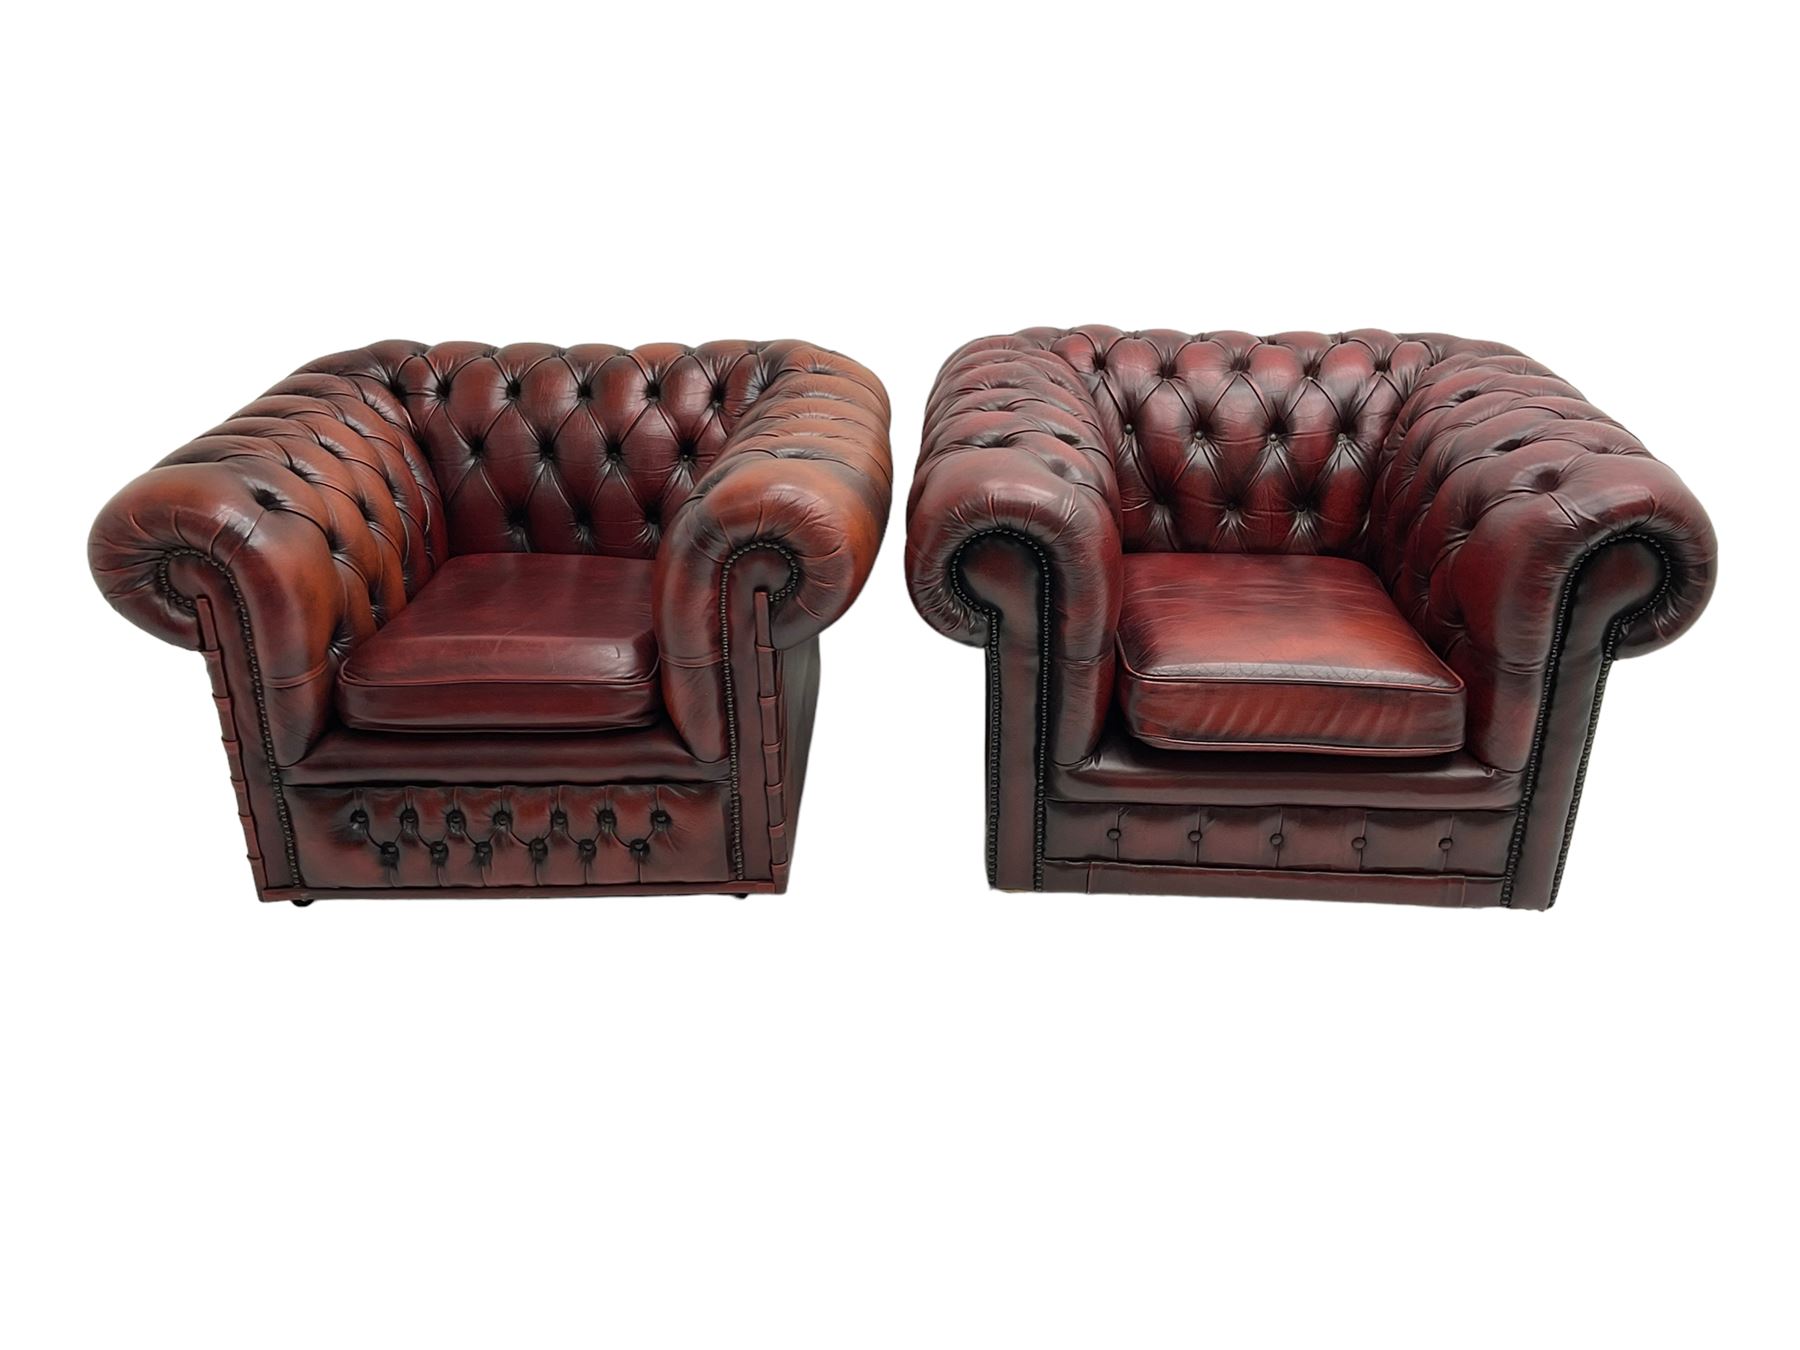 Pair chesterfield armchairs in oxblood leather - Image 6 of 7